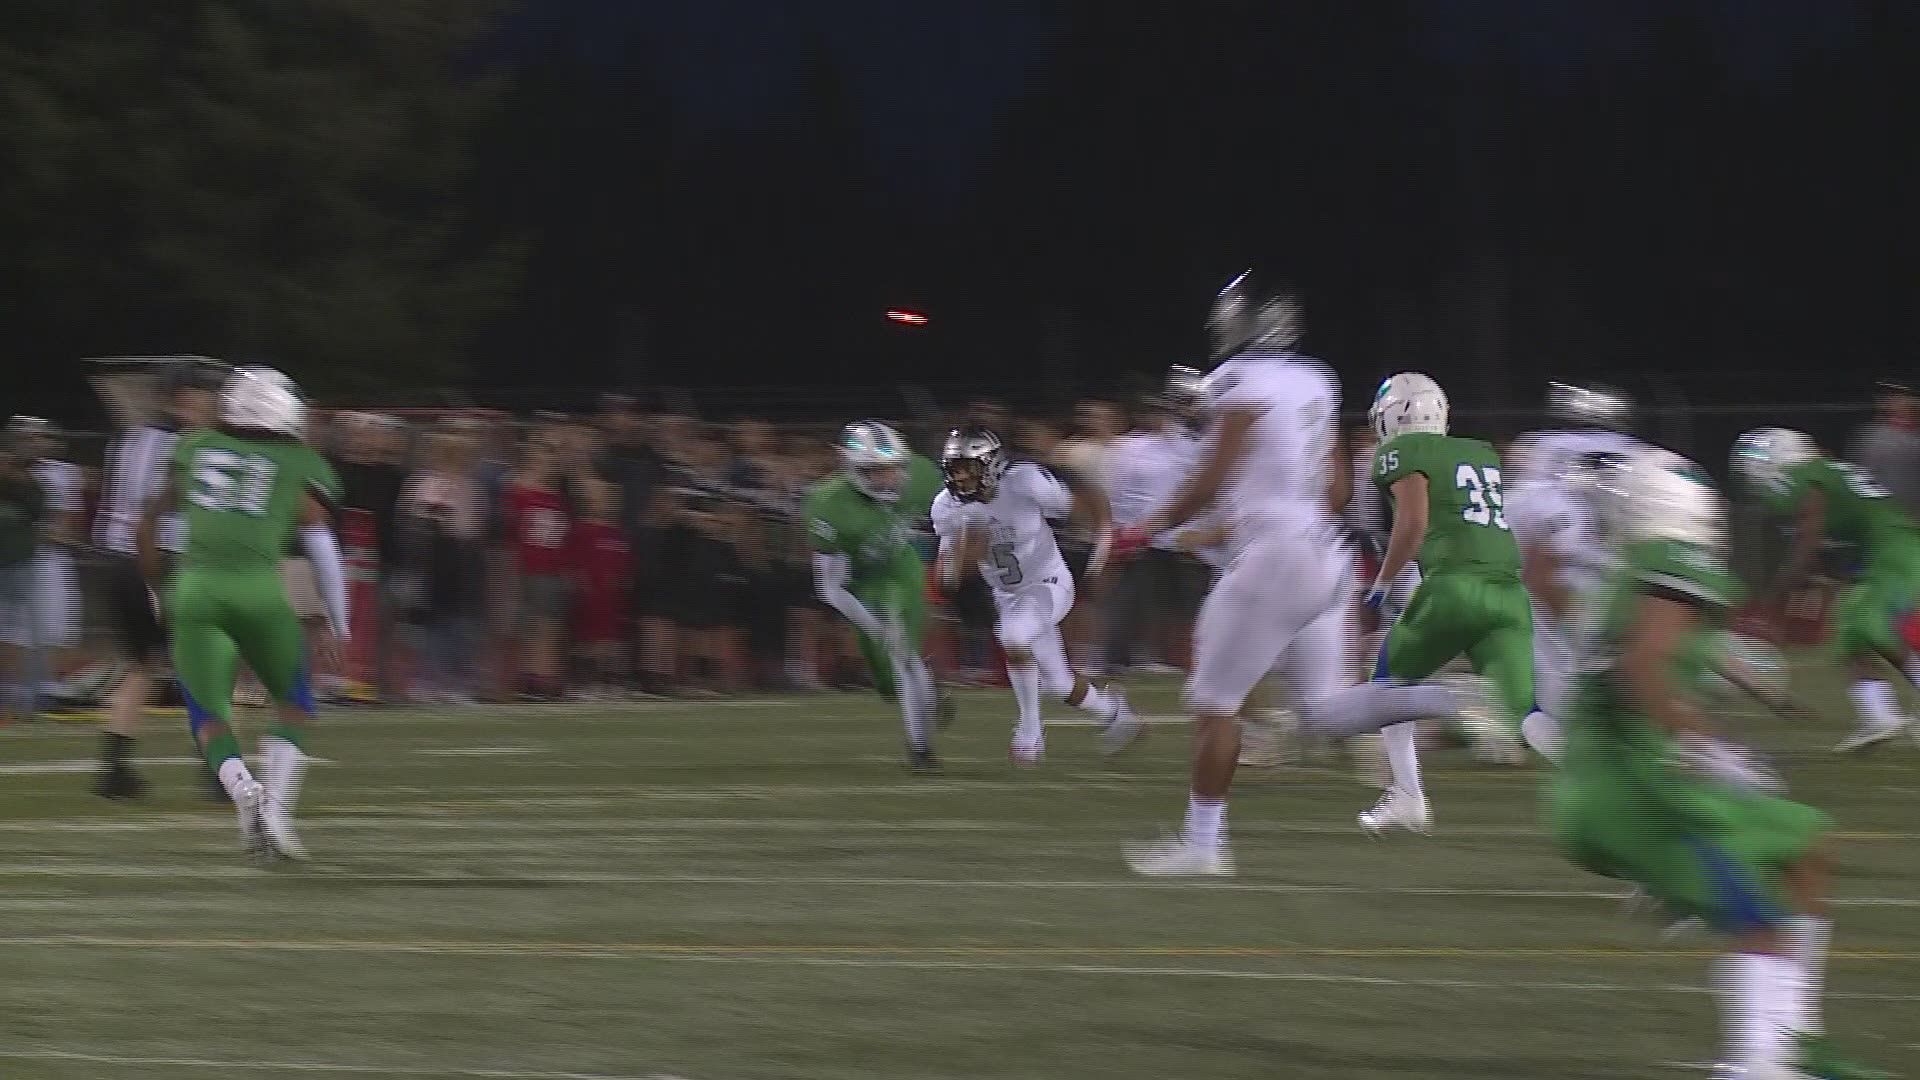 Highlights of the Union Titans' state championship-winning season in Washington. All highlights aired on KGW's Friday Night Flights #KGWPreps